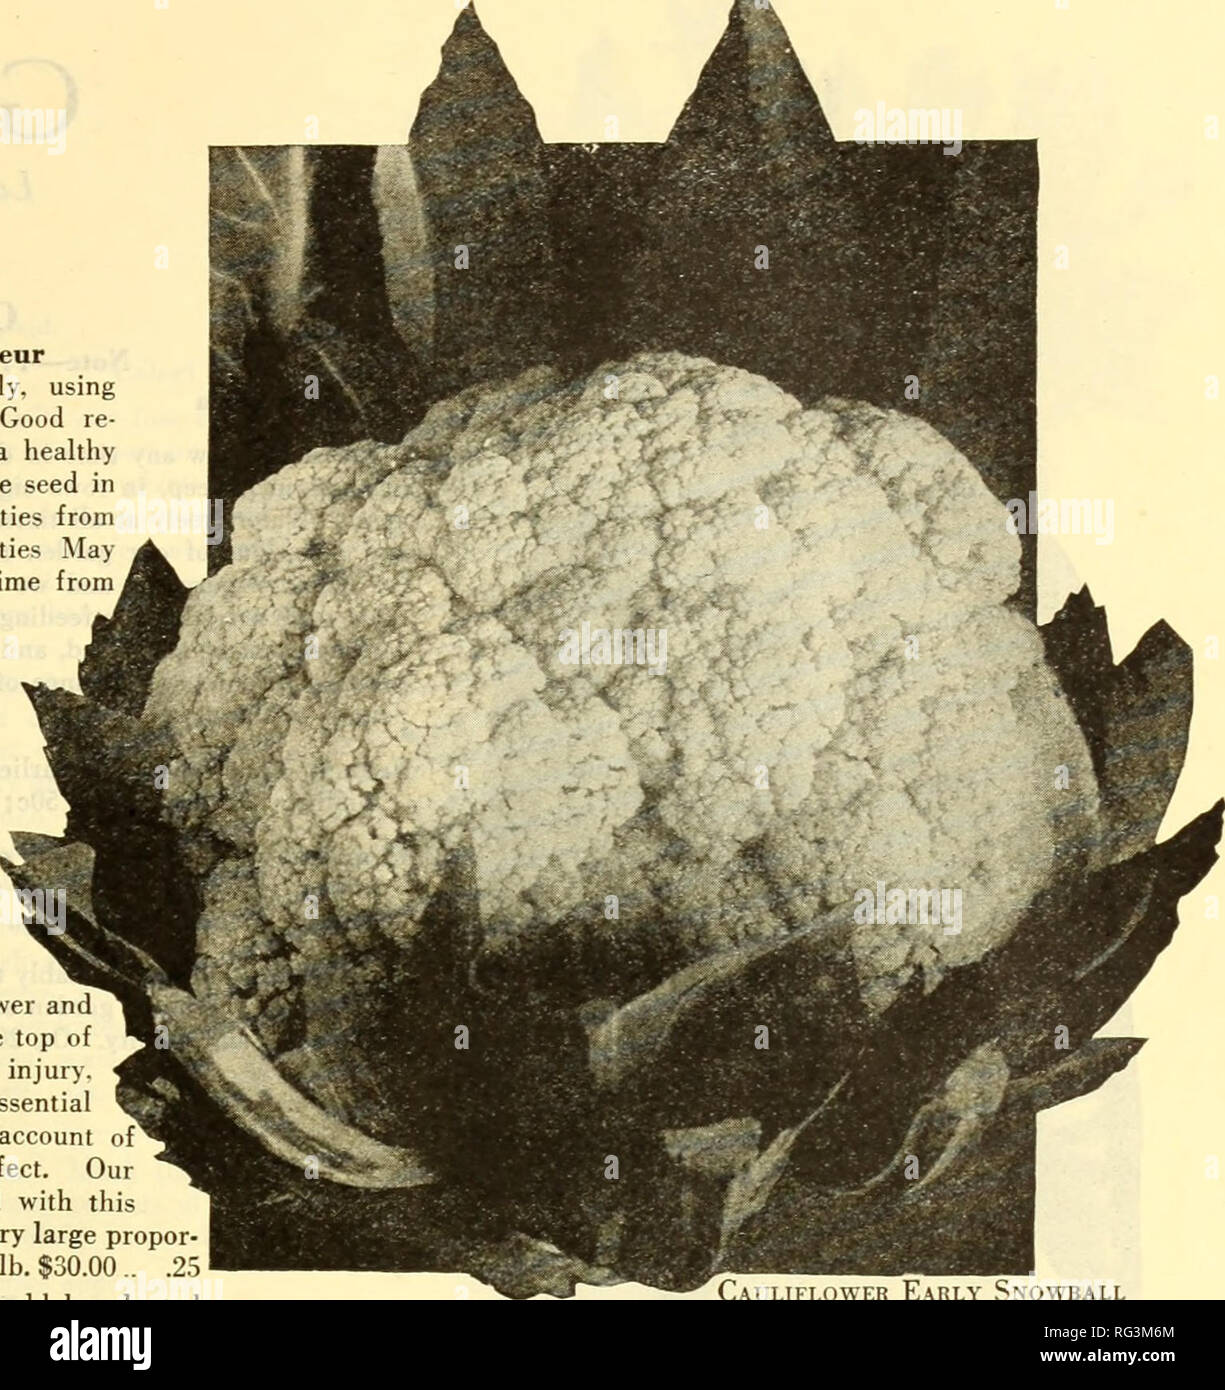 . California gardening. Nurseries (Horticulture) Catalogs; Flowers Seeds Catalogs; Plants, Ornamental Catalogs; Vegetables Seeds Catalogs; Trees Catalogs; Grasses Seeds Catalogs; Gardening Equipment and supplies Catalogs. SEEDS California s Best CAULIFLOWER Note—Prices listed art postpaid. Collflor Blumenkohl Chou-fleur Culture: Prepare the seed-bed carefully, using only rich and thoroughly pulverized soil. Good re- sults are obtained by keeping the plant in a healthy and rapidly growing condition. Broadcast the seed in the seed-bed prepared, sowing the early varieties from May 15th to July 1s Stock Photo